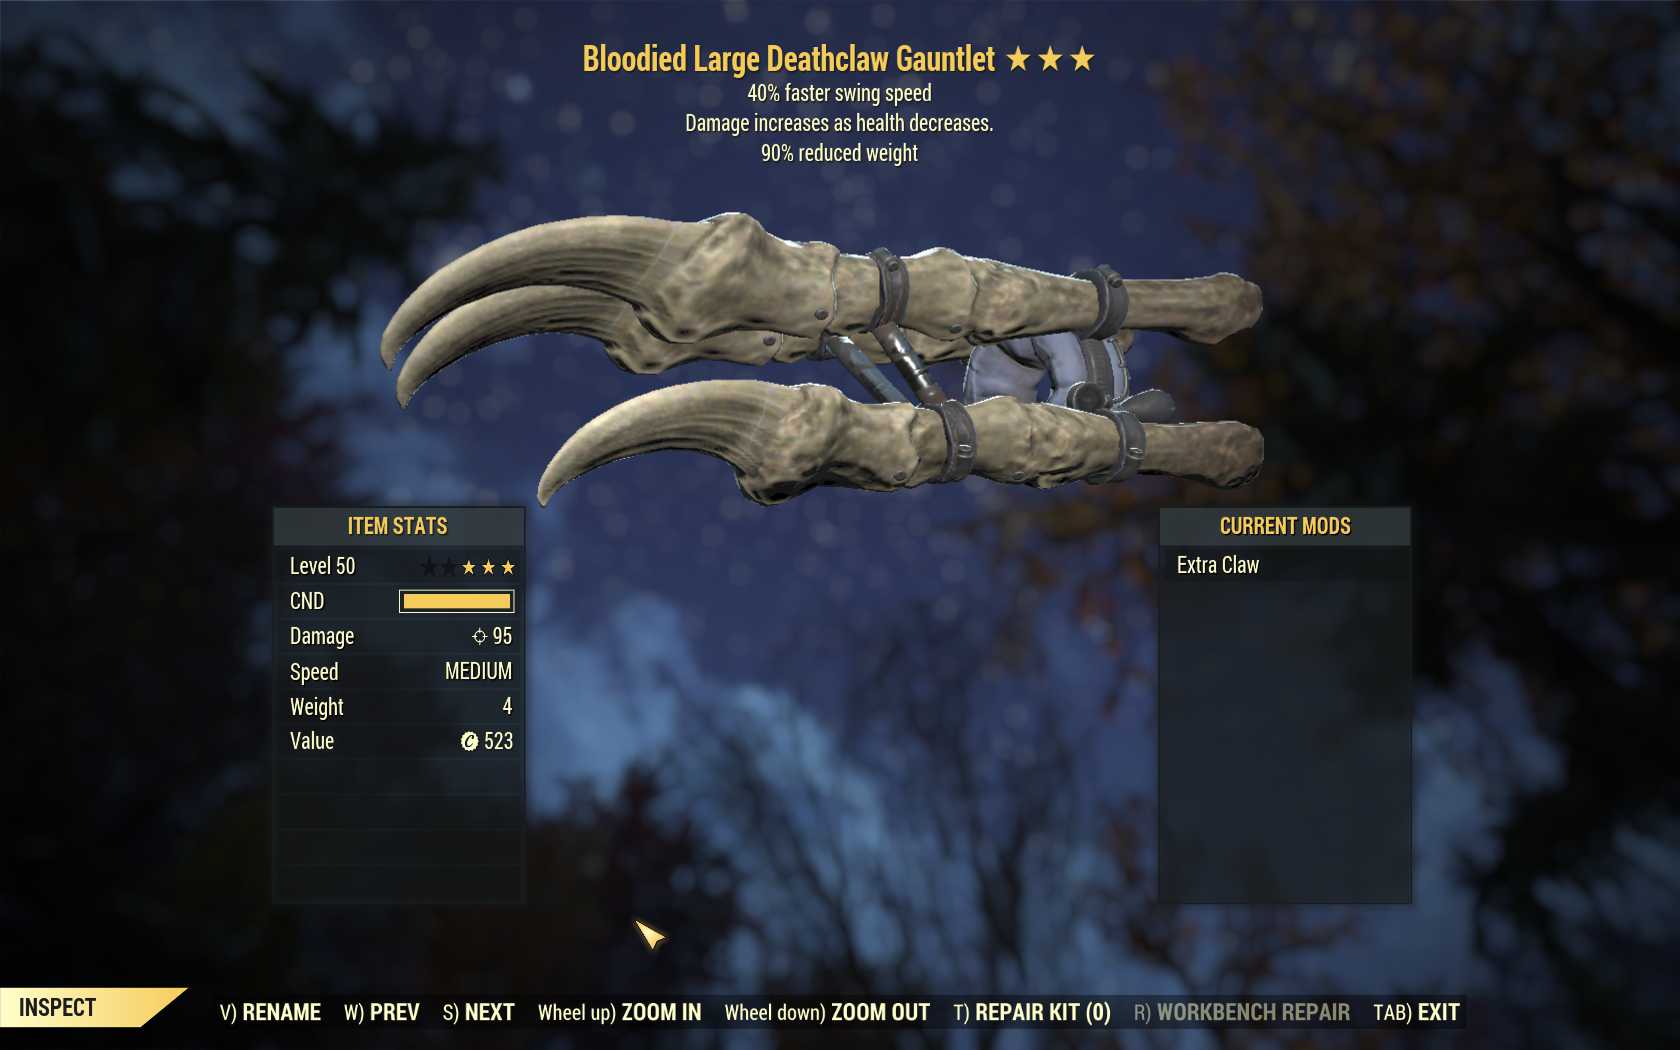 Bloodied Deathclaw Gauntlet (40% Faster Swing Speed, 90% reduced weight)